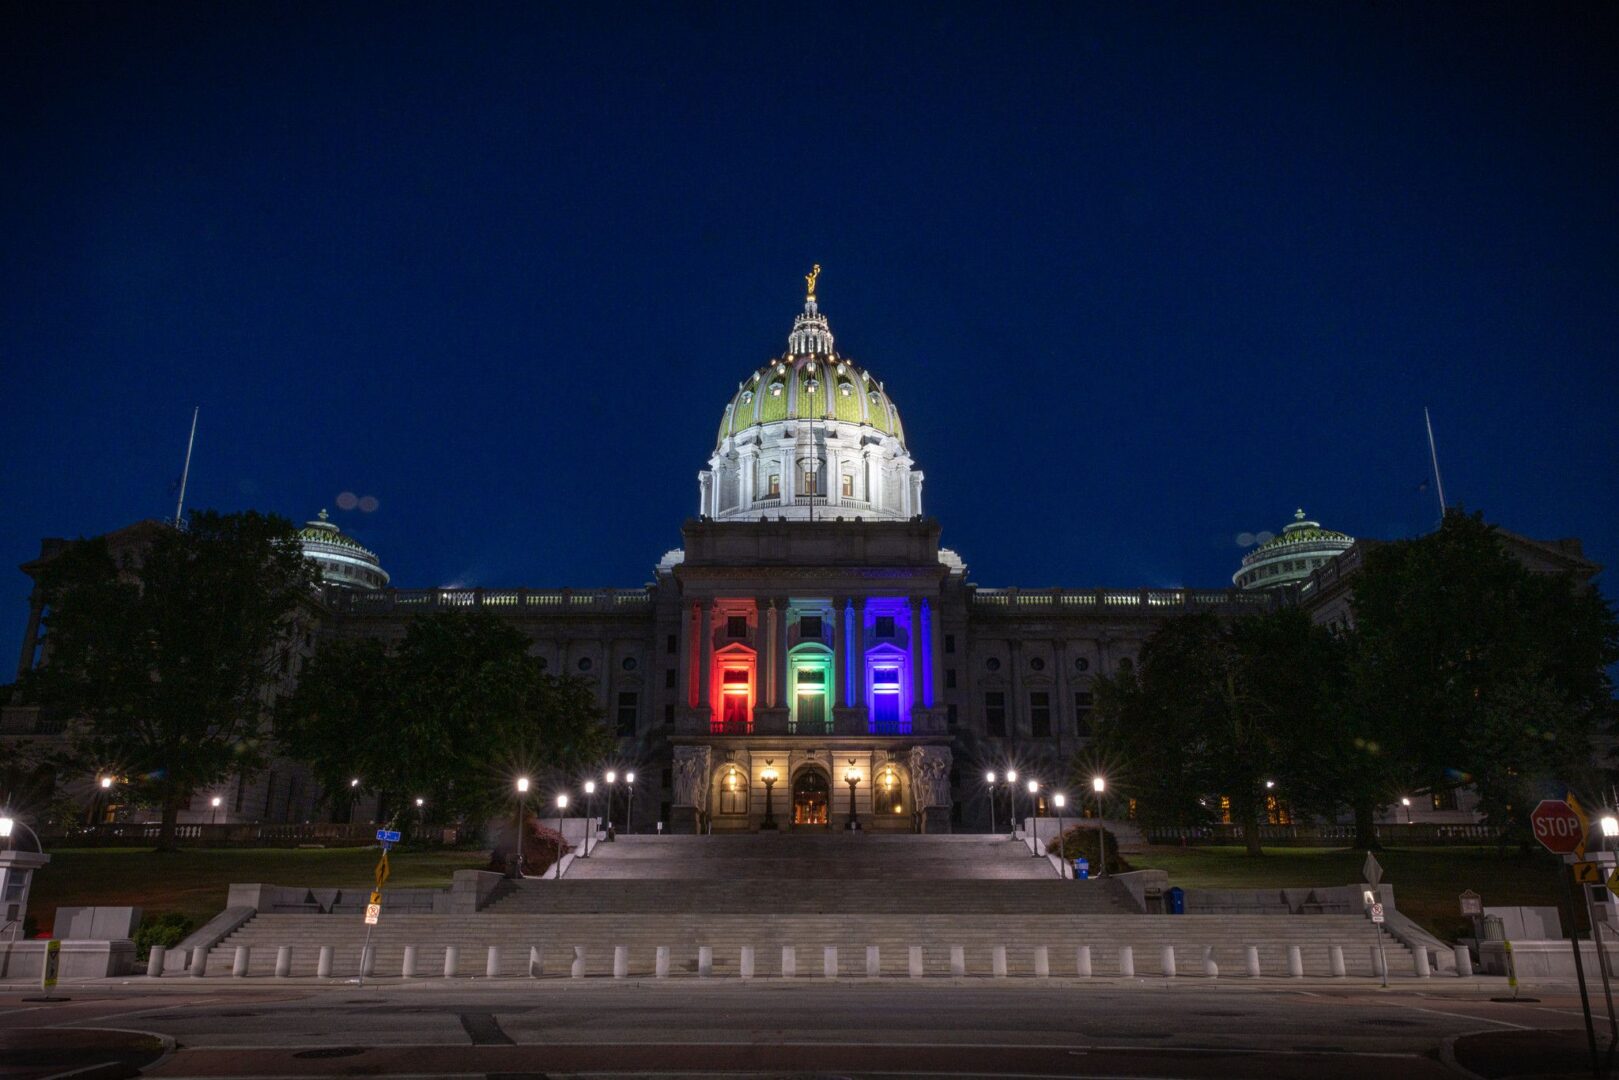 LGBTQ pride colors are displayed on the state Capitol in Harrisburg, Pennsylvania.